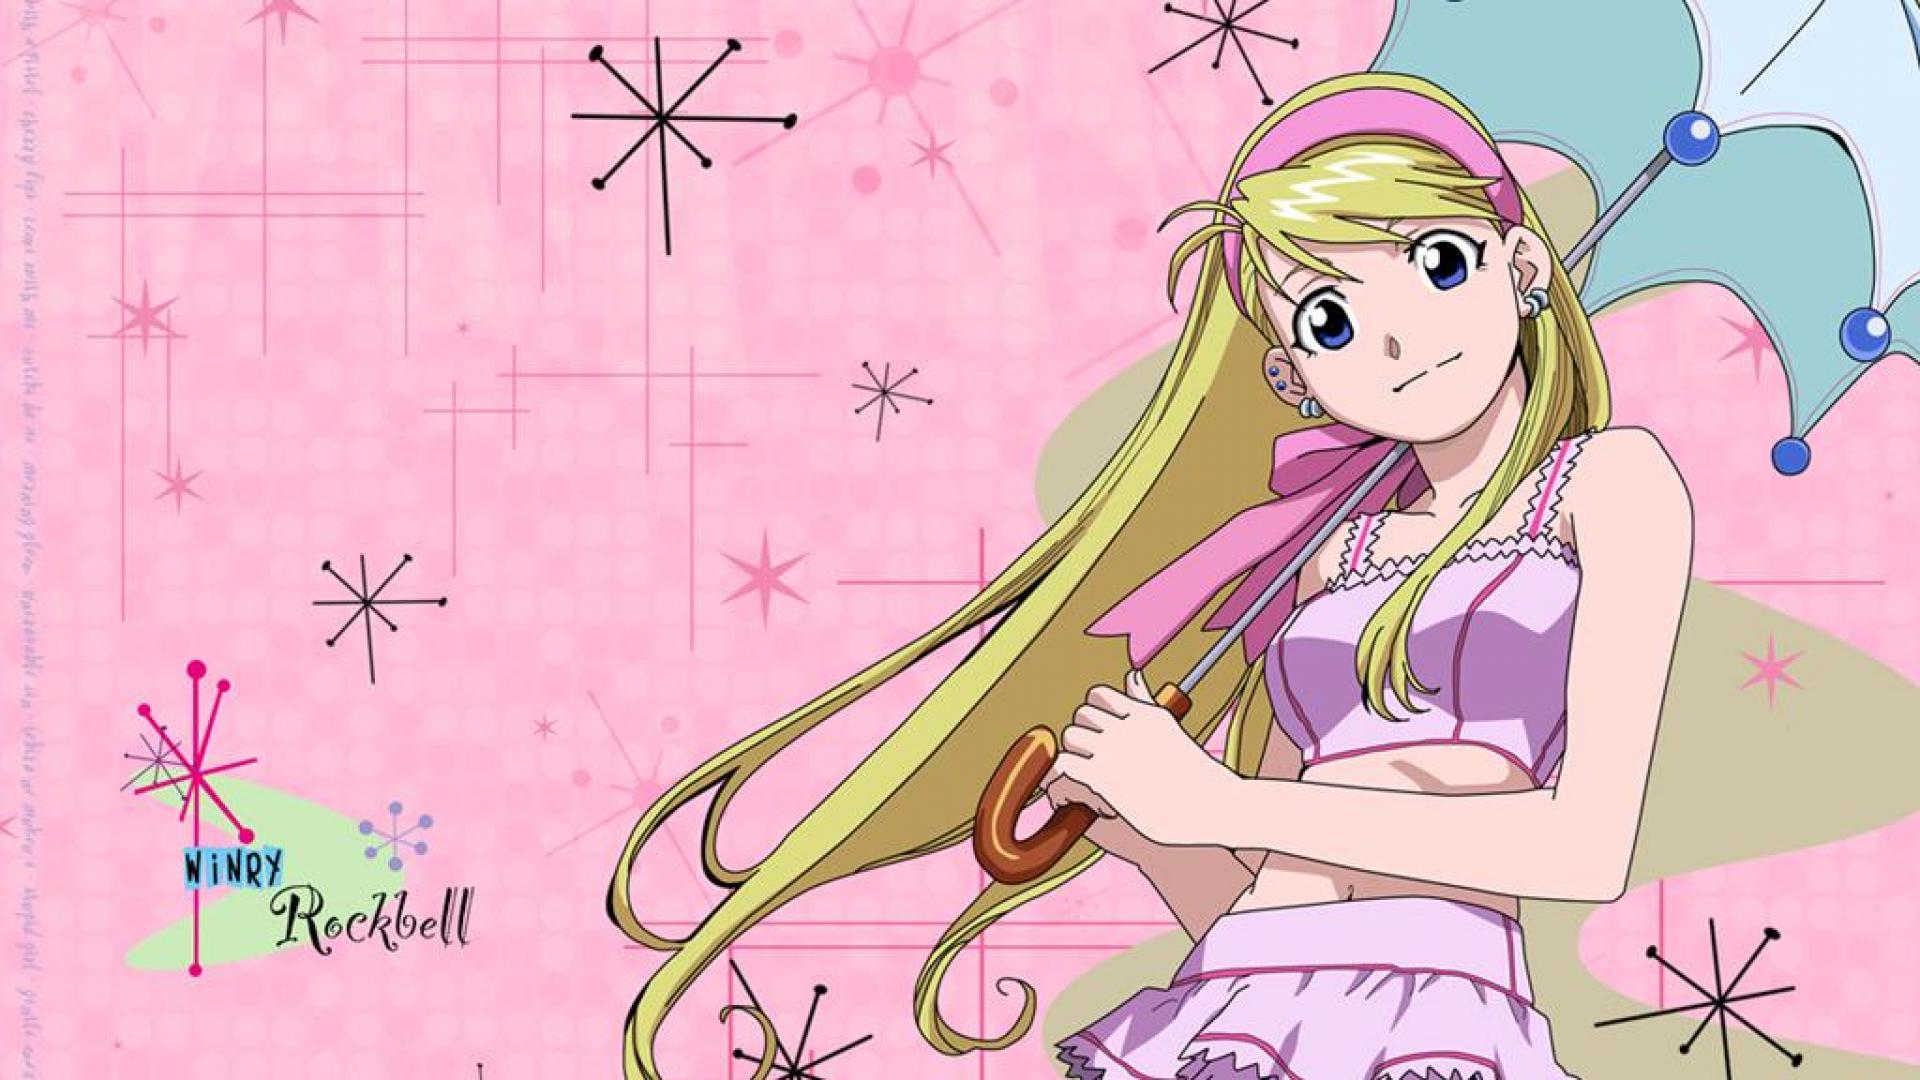 Winry rockbell - - High Quality and Resolution Wallpapers